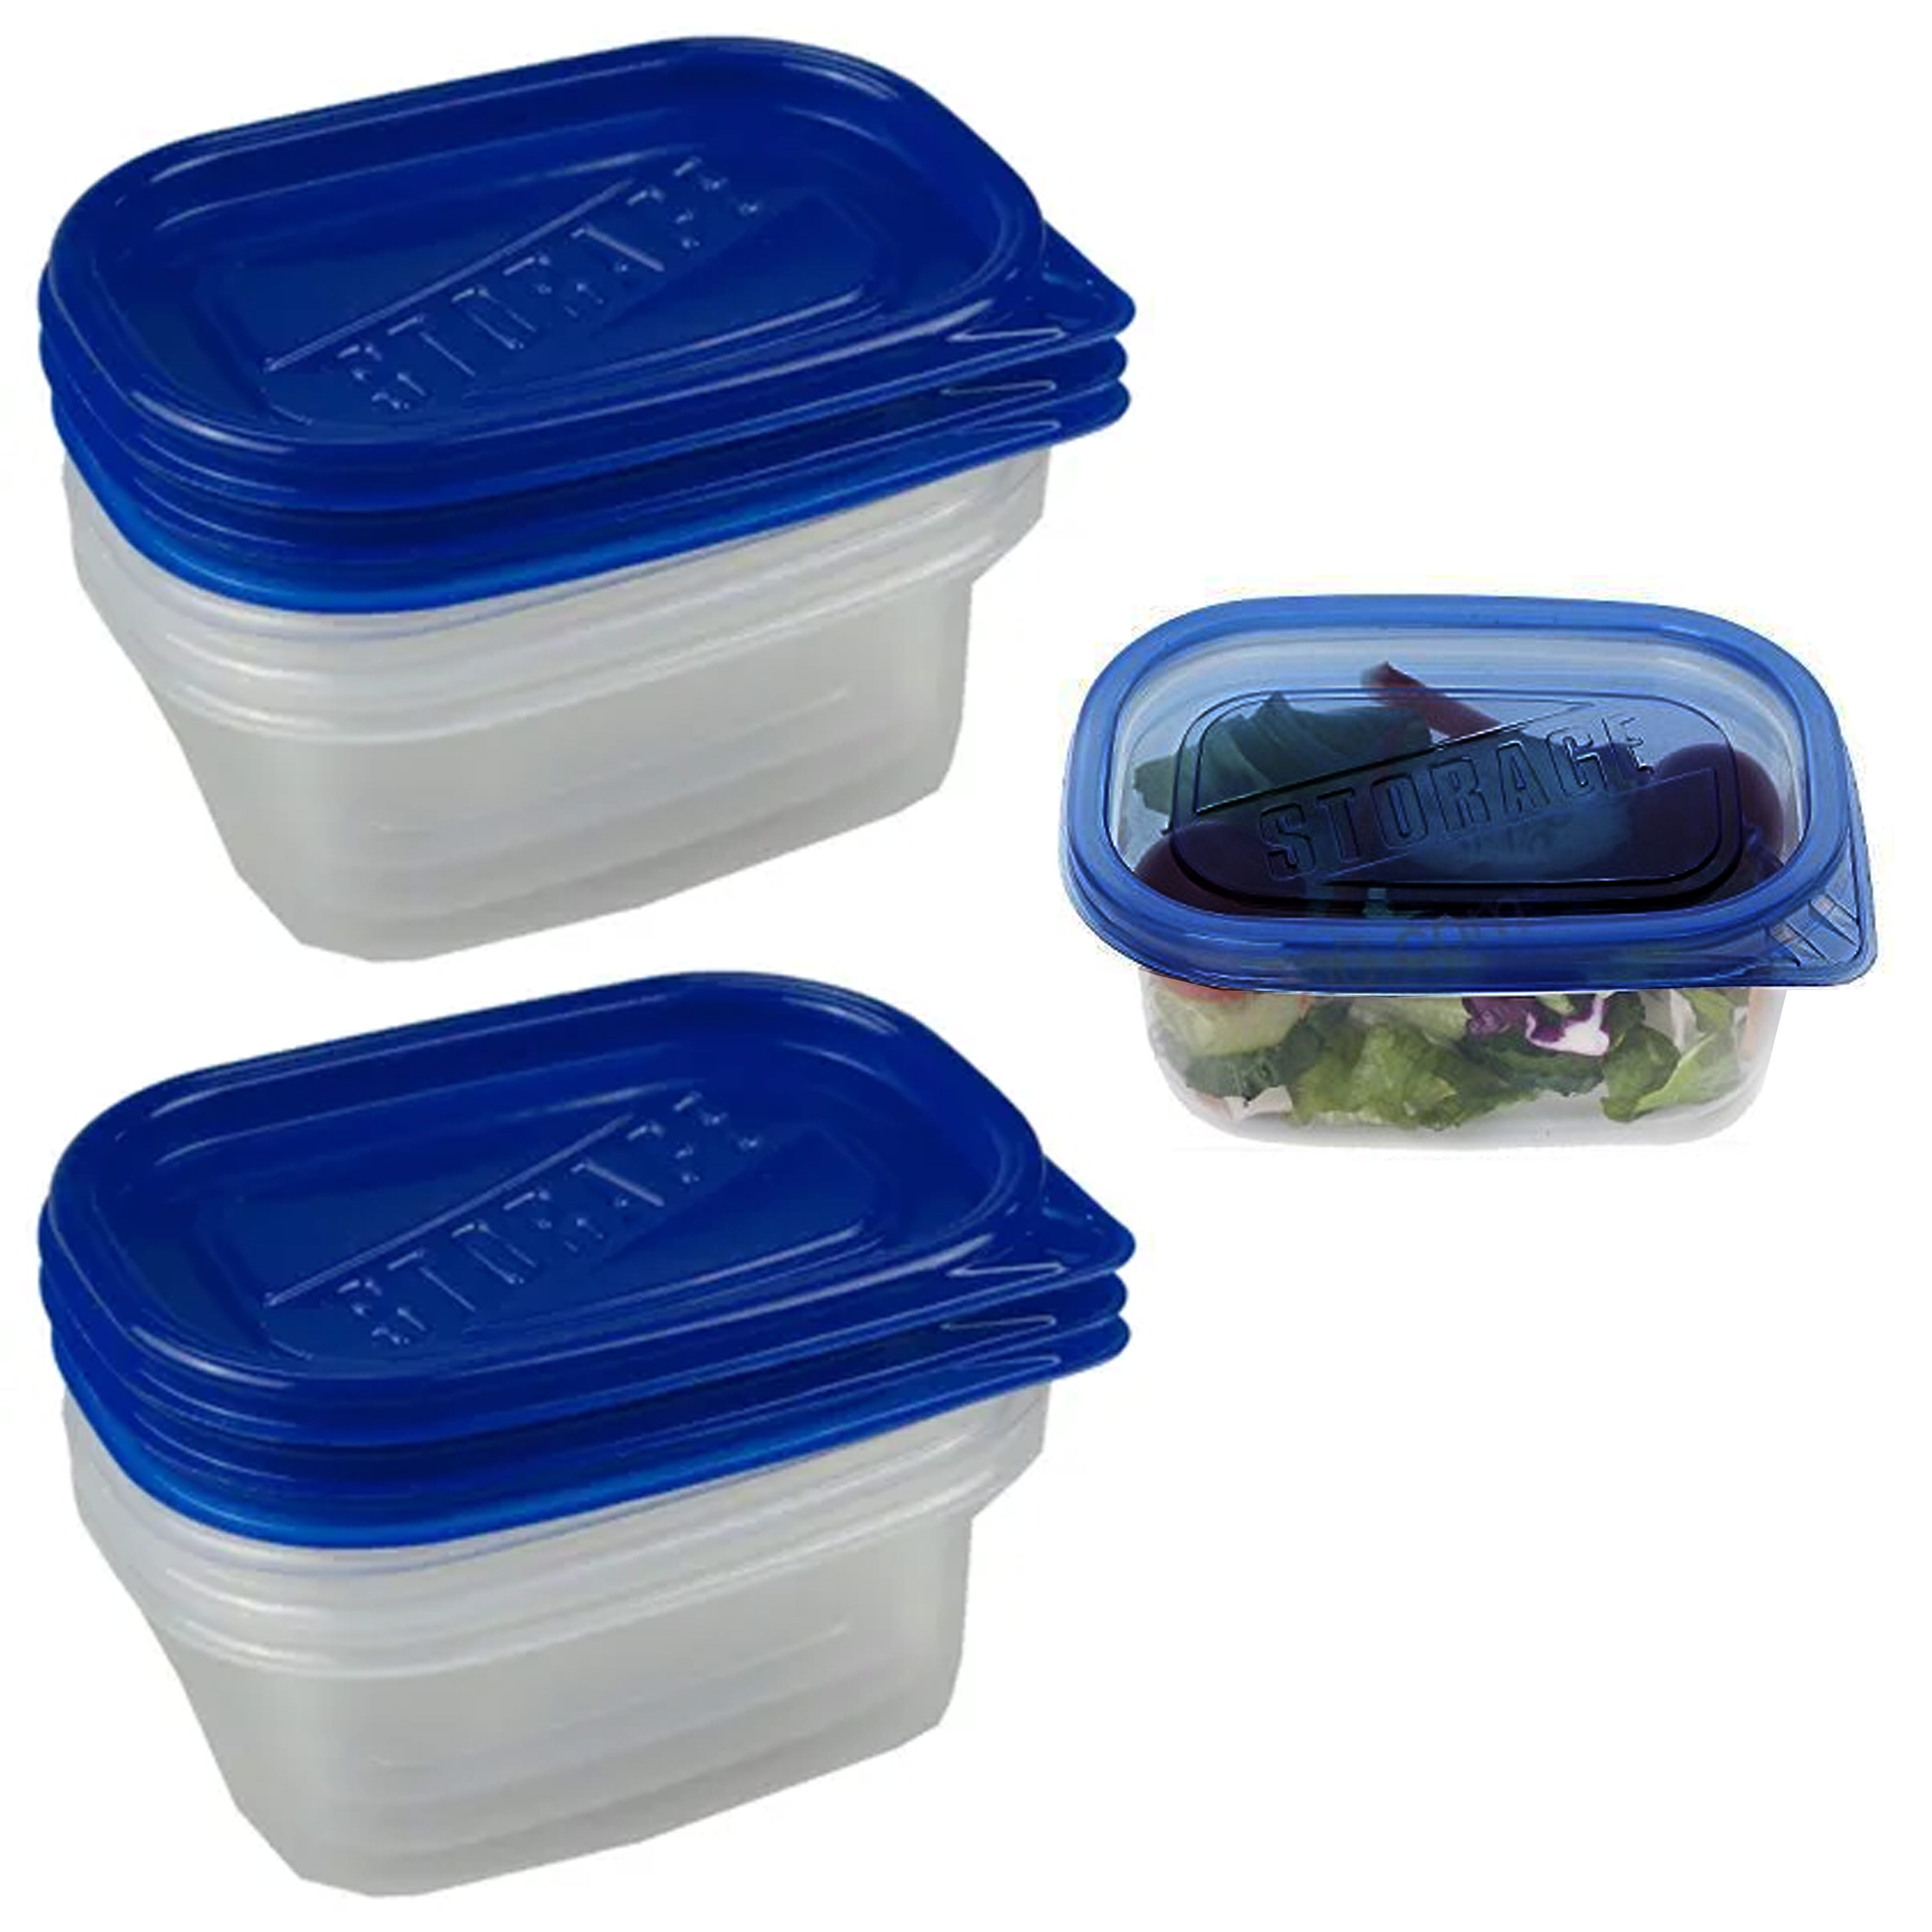 PLASTICPRO 6 Pack Twist Cap Food Storage Containers with Blue Screw on Lid-  4 oz Reusable Meal Prep Containers - Small Freezer Containers Microwave